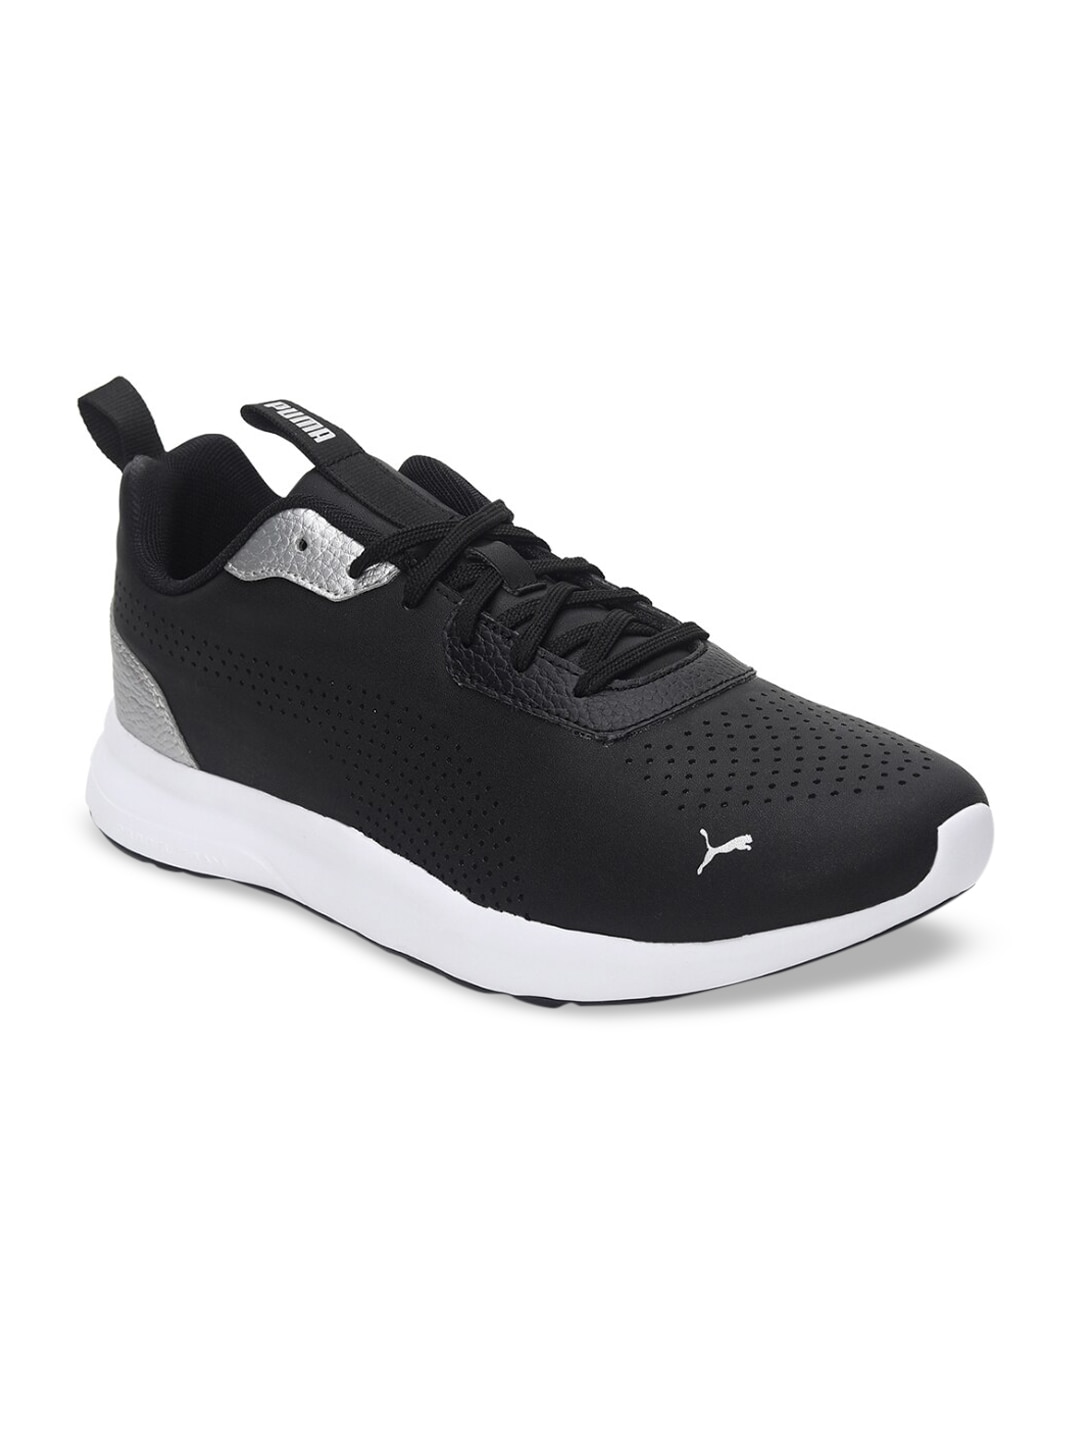 Puma Unisex Black Perforated Low Textured Sneakers